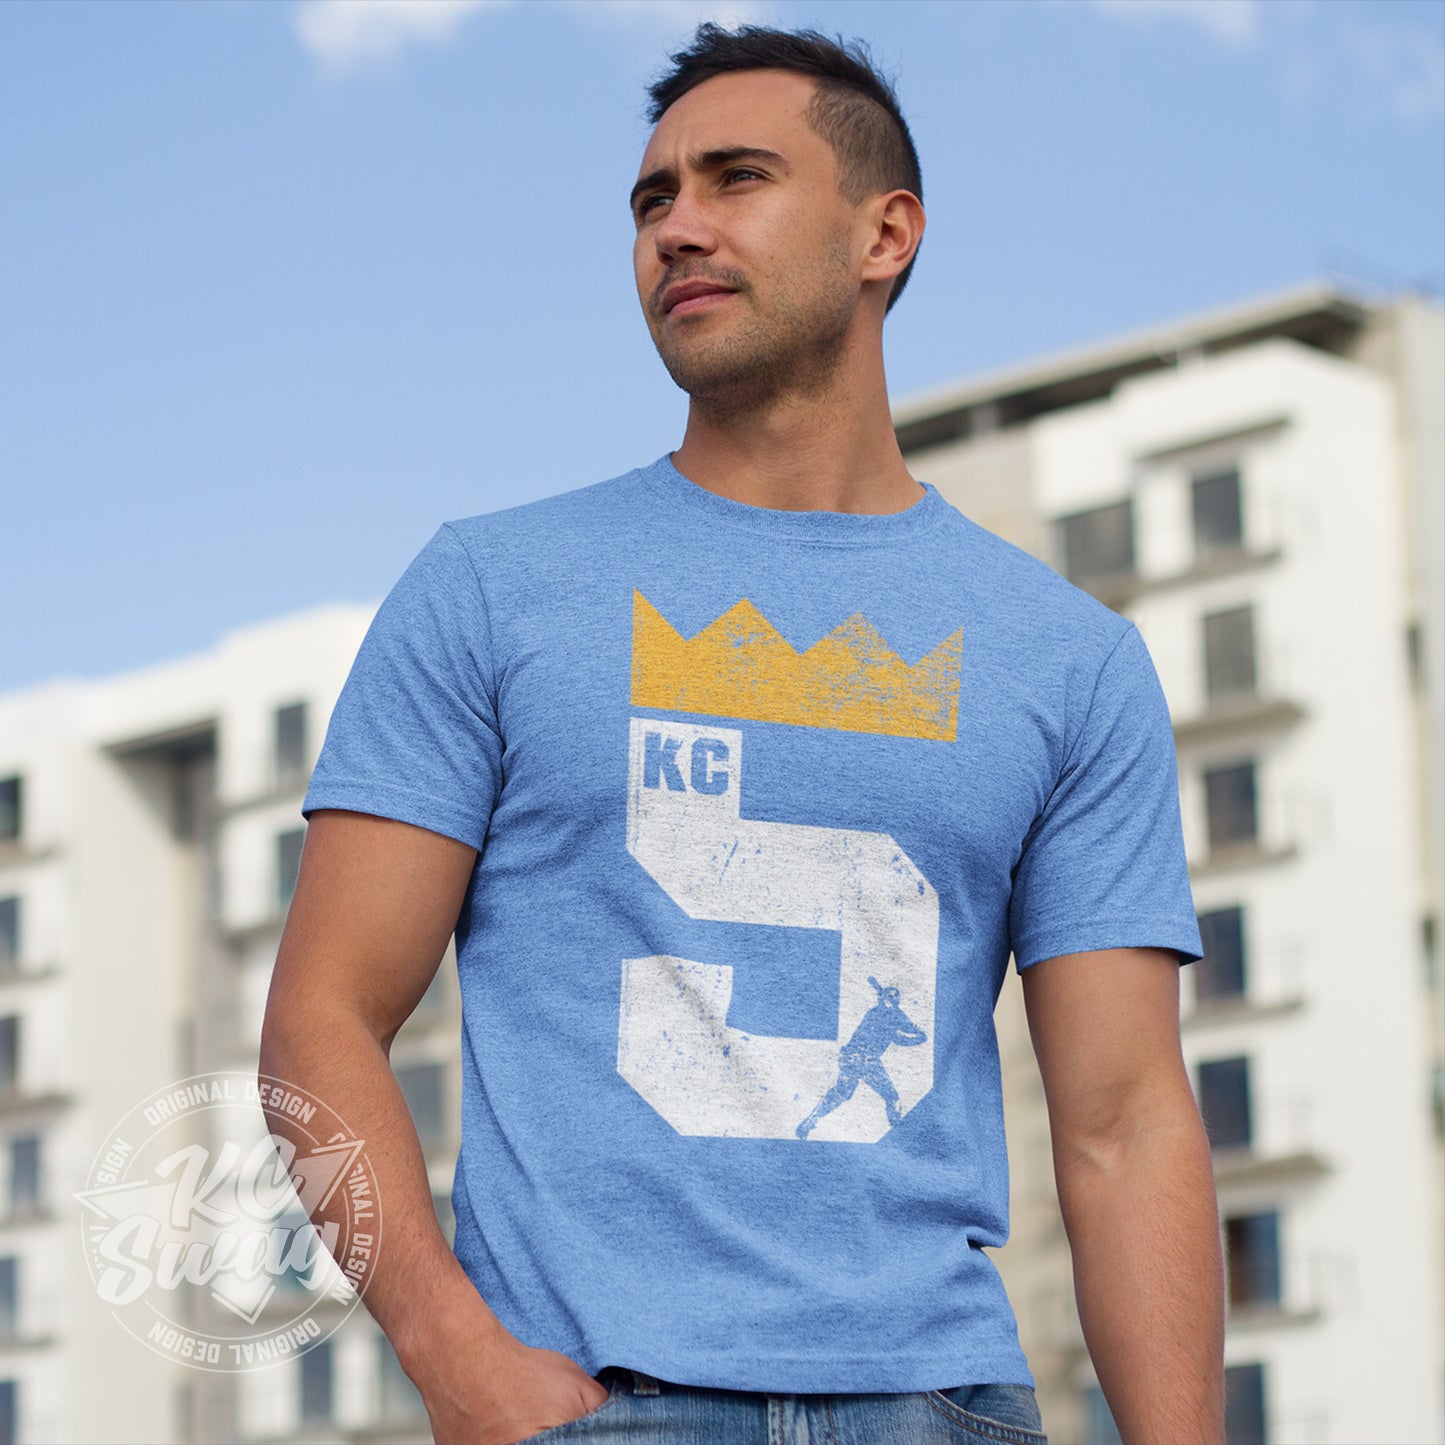 KC Swag - Kansas City Royals, Brett Five Crown design on heather columbia blue unisex t-shirt worn by male model standing in front of a large apartment complex